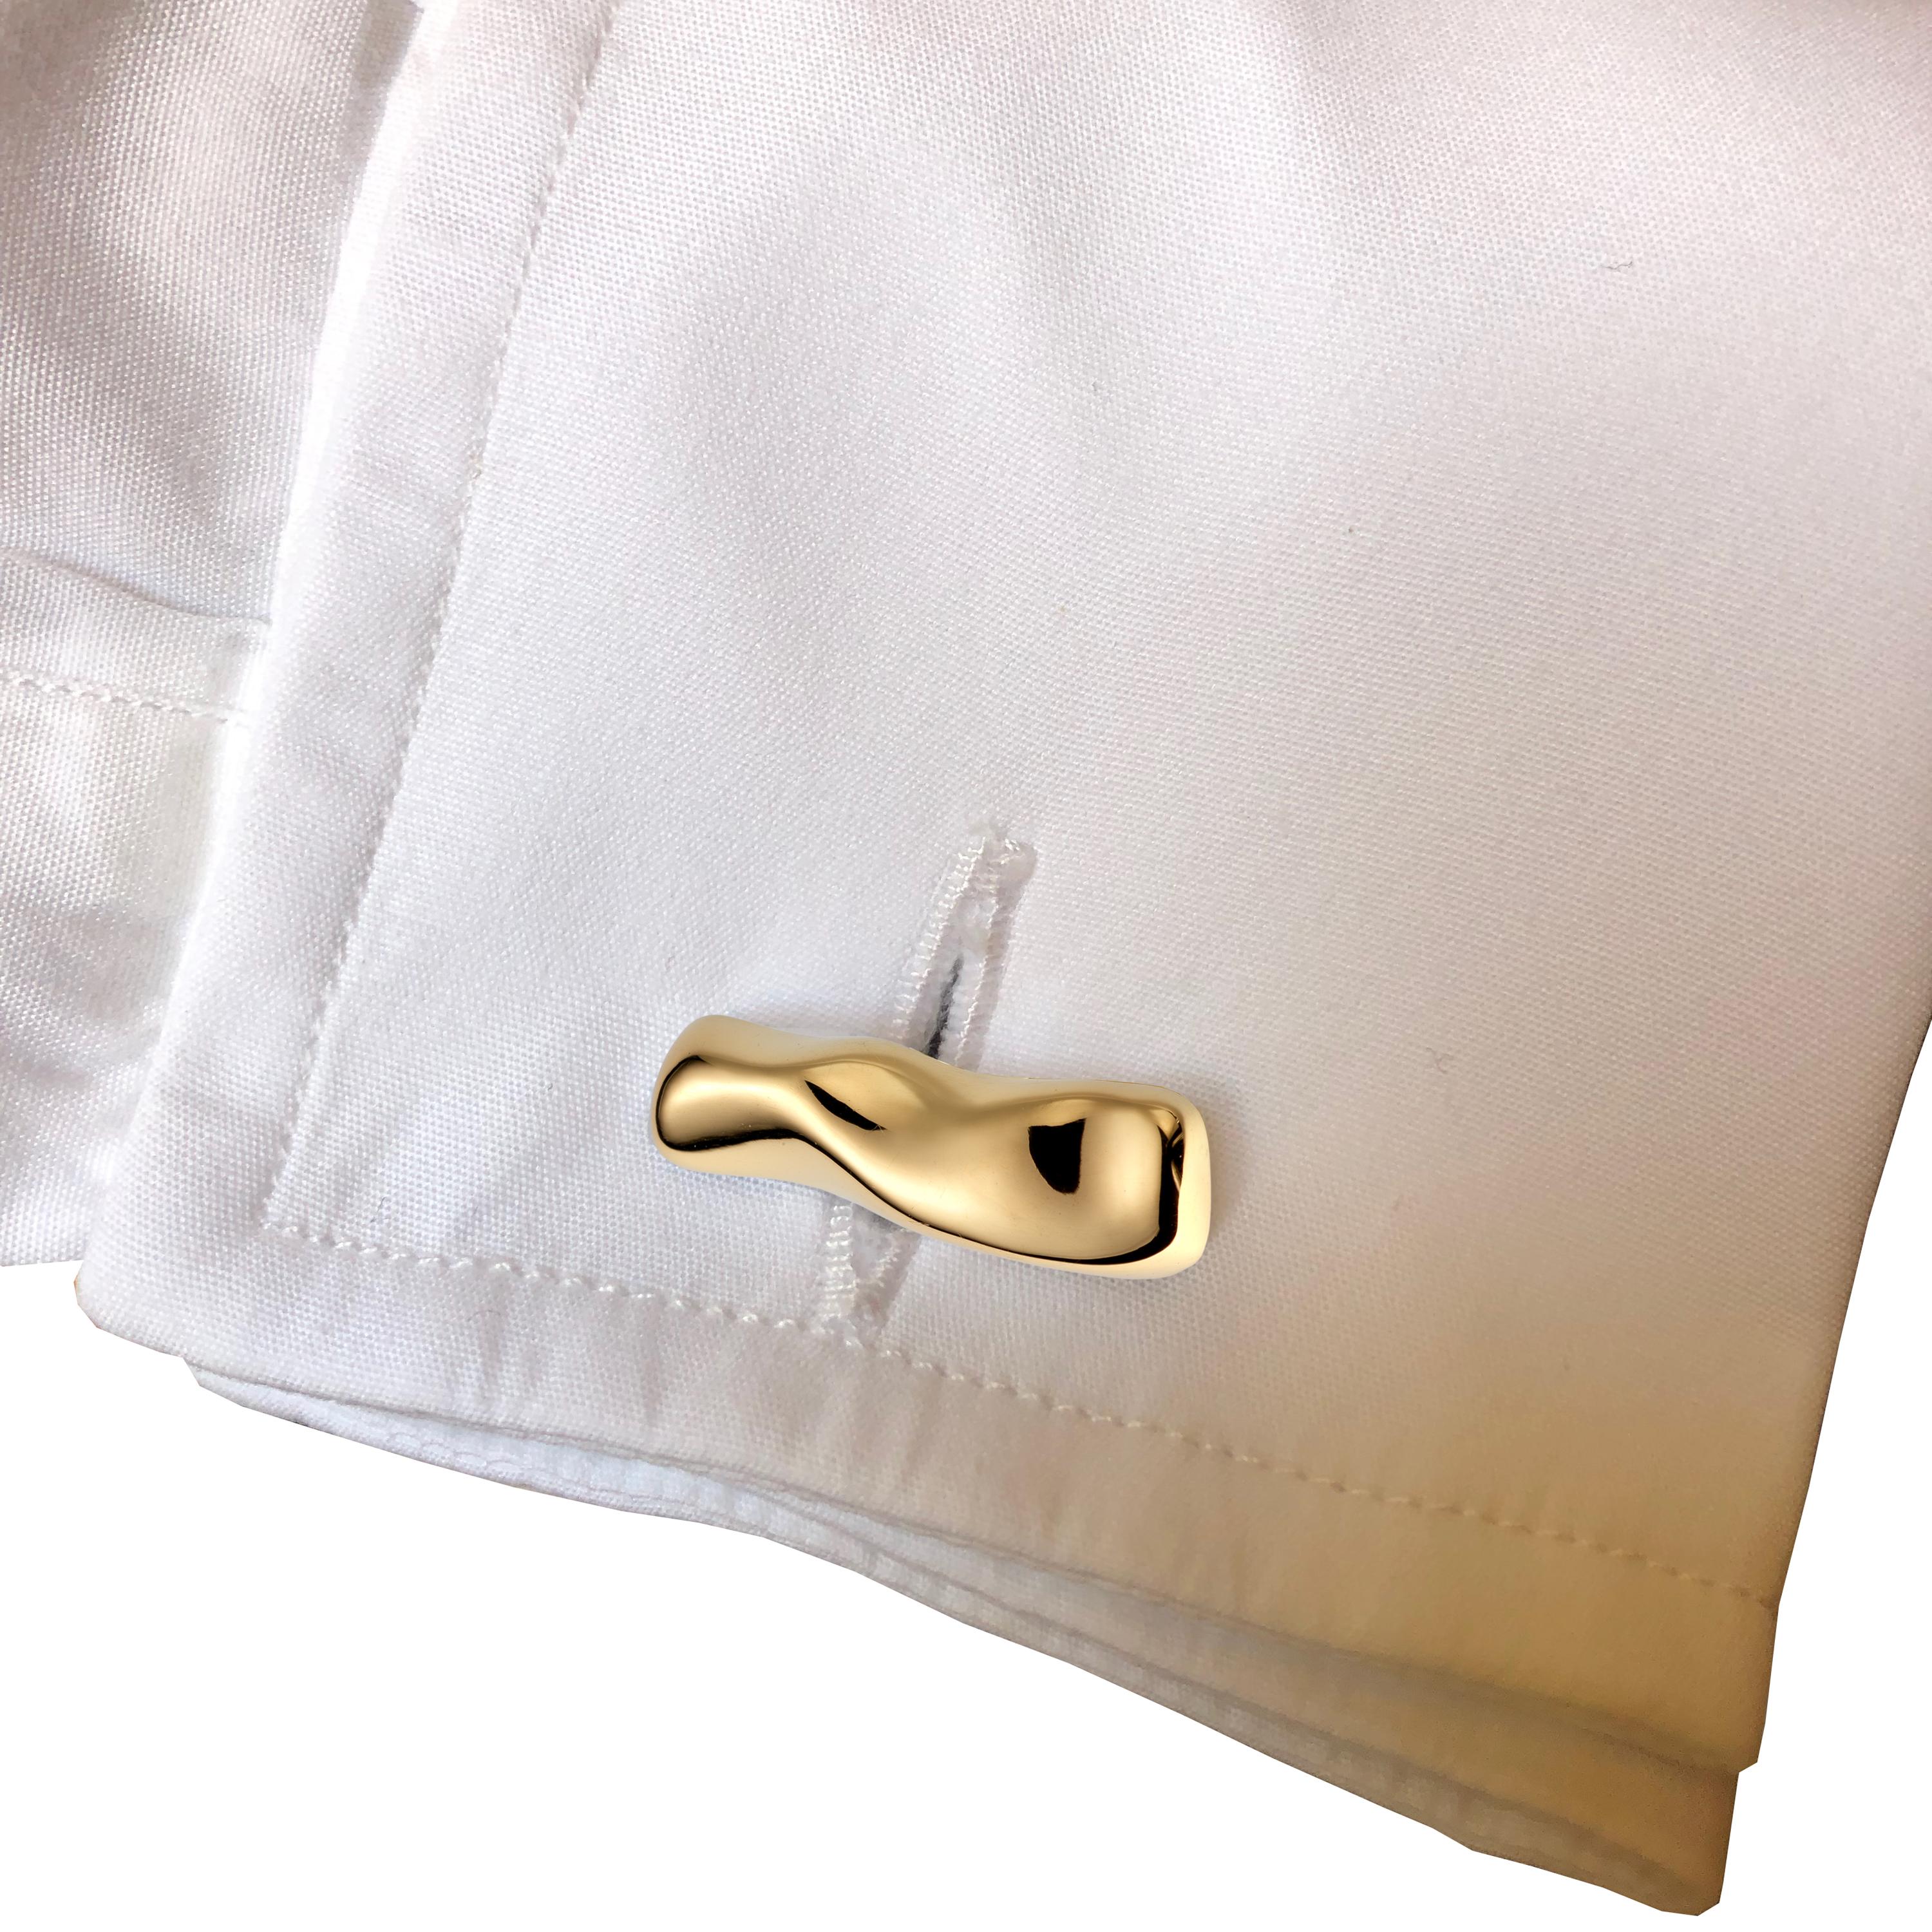 Mercure contemporary Cufflinks in yellow gold are made by hand in Nathalie Jean's Milan atelier in limited edition. Small, delicate, ebbing sculptures with seemingly random forms, these supple shapes are modulated in relief and seem to flow like